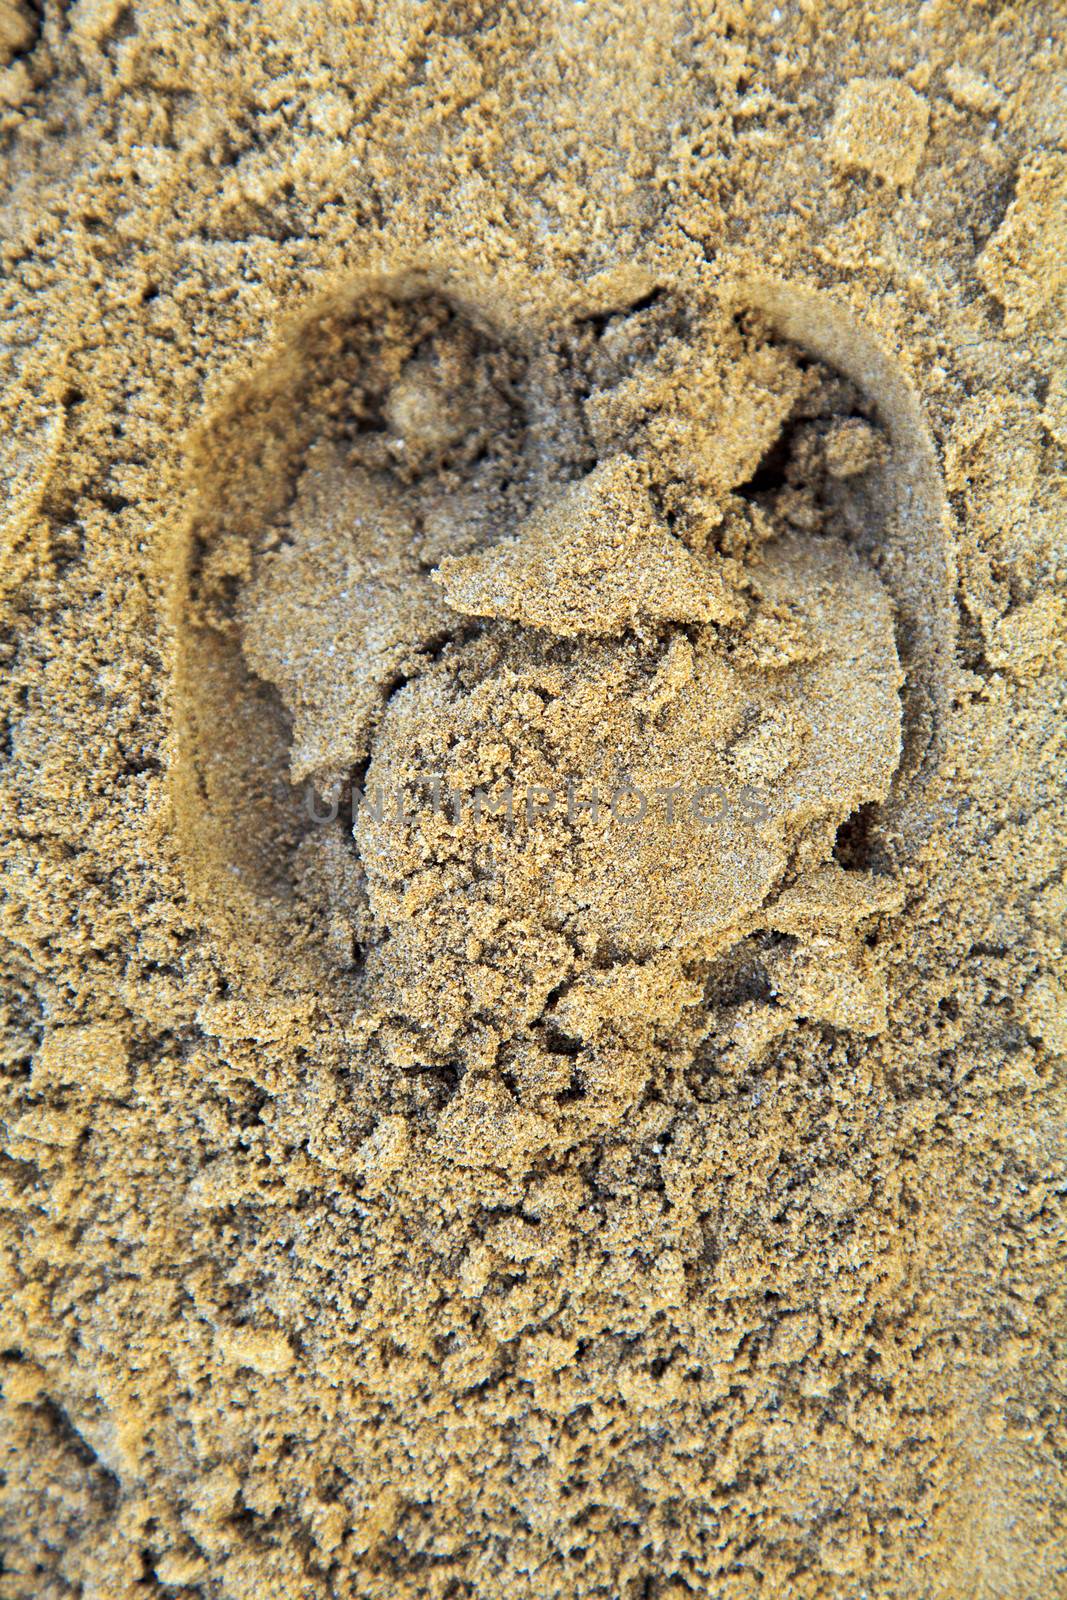 Any orientation image of moist beach sand with the hoof print from a bullock. Shot location was Manori Beach, Bombay India